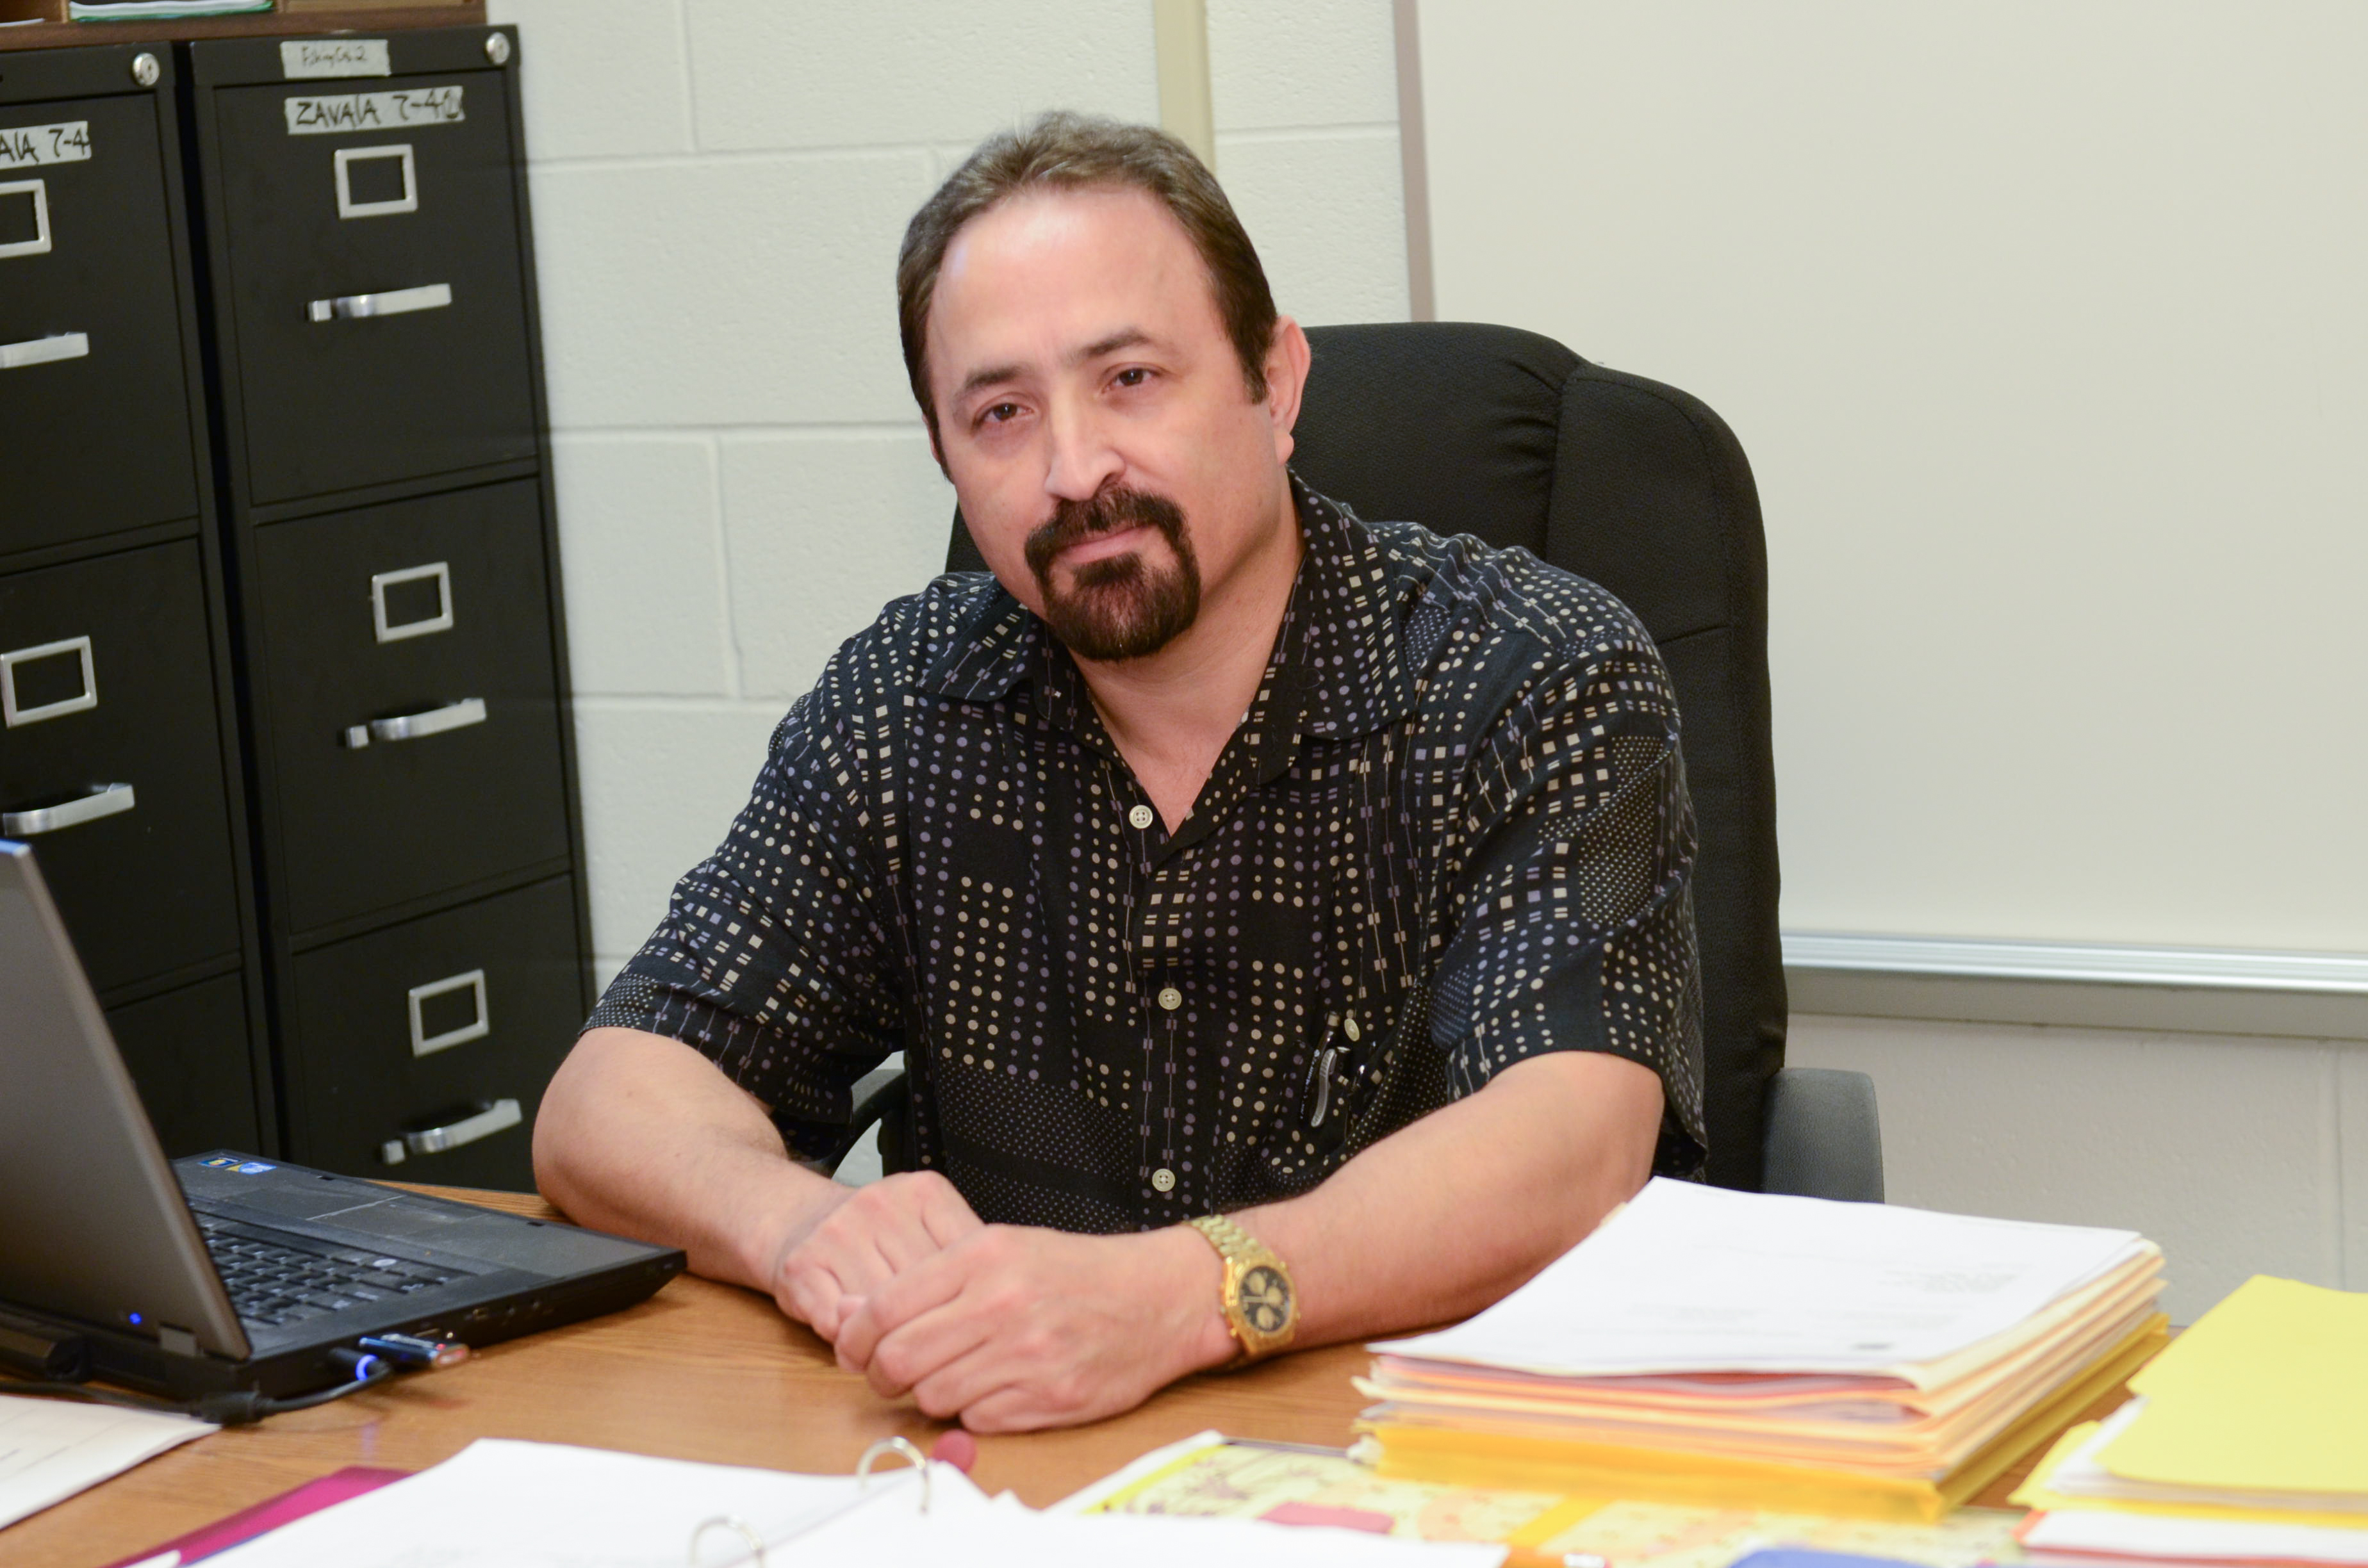 Teacher of the Week: Zavala keeps students on track for their futures